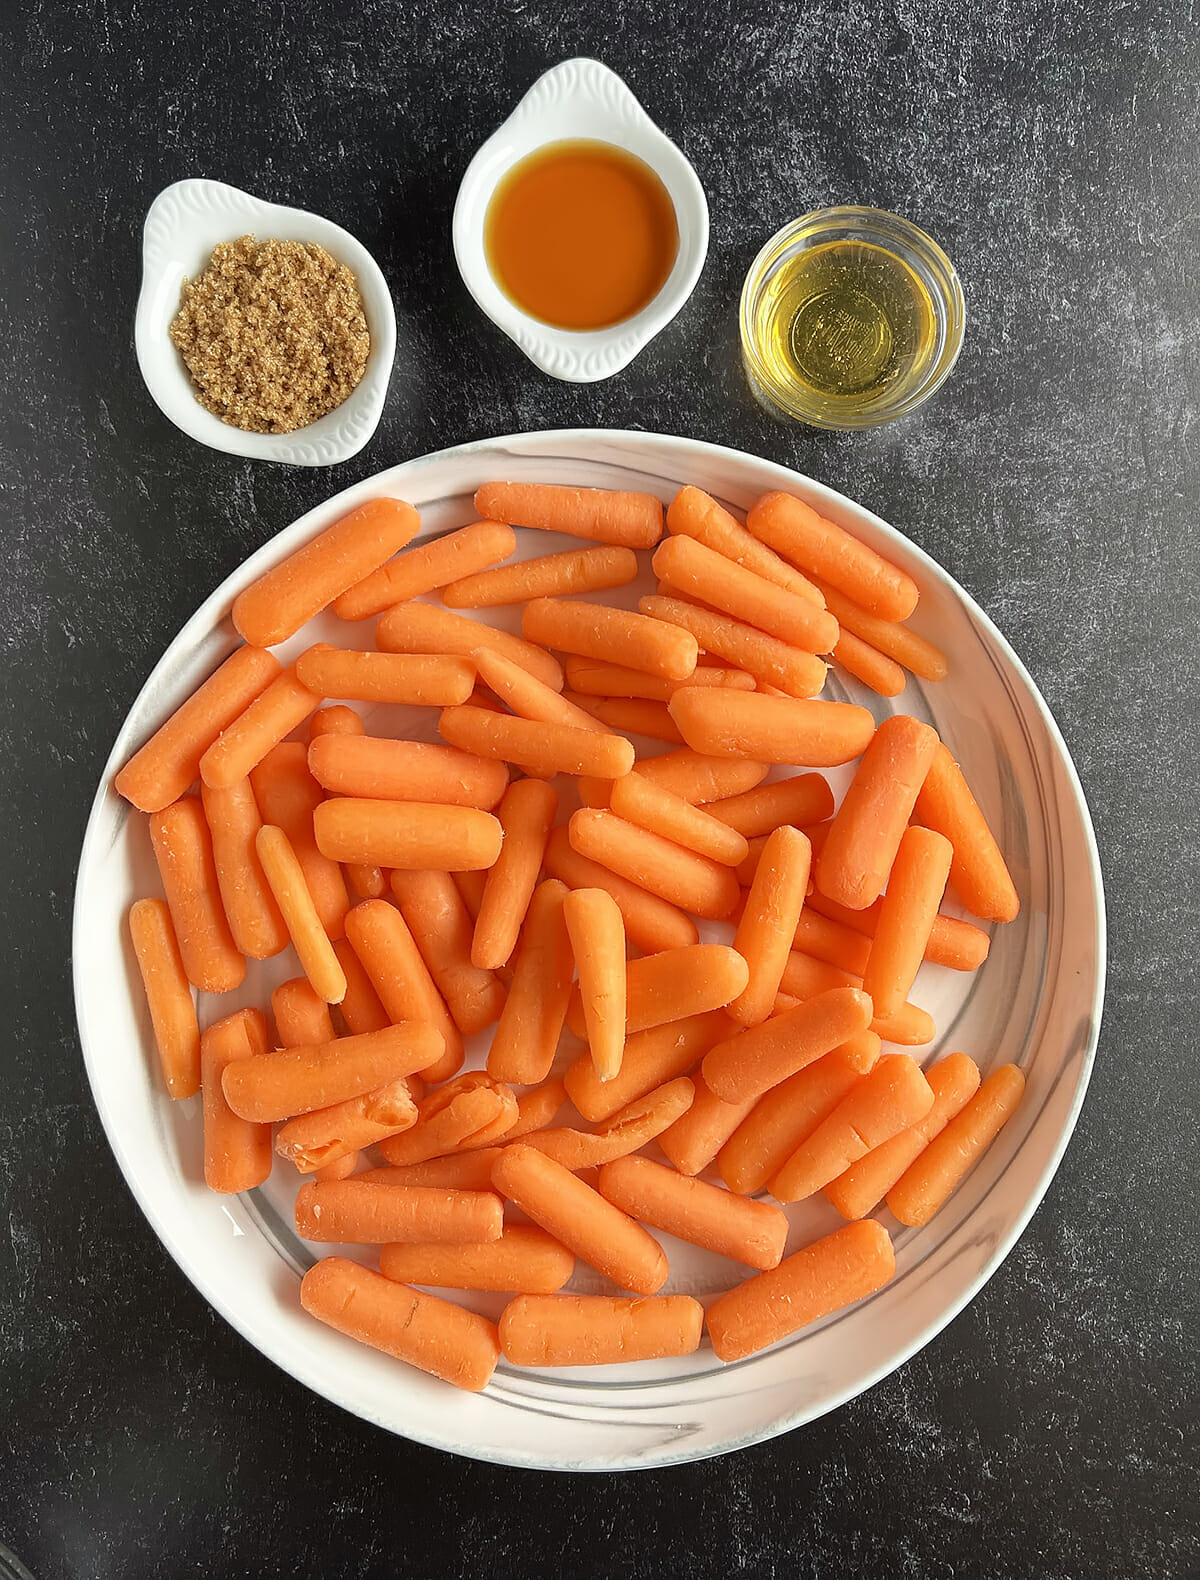 Ingredients to make air fryer honey maple roasted baby carrots